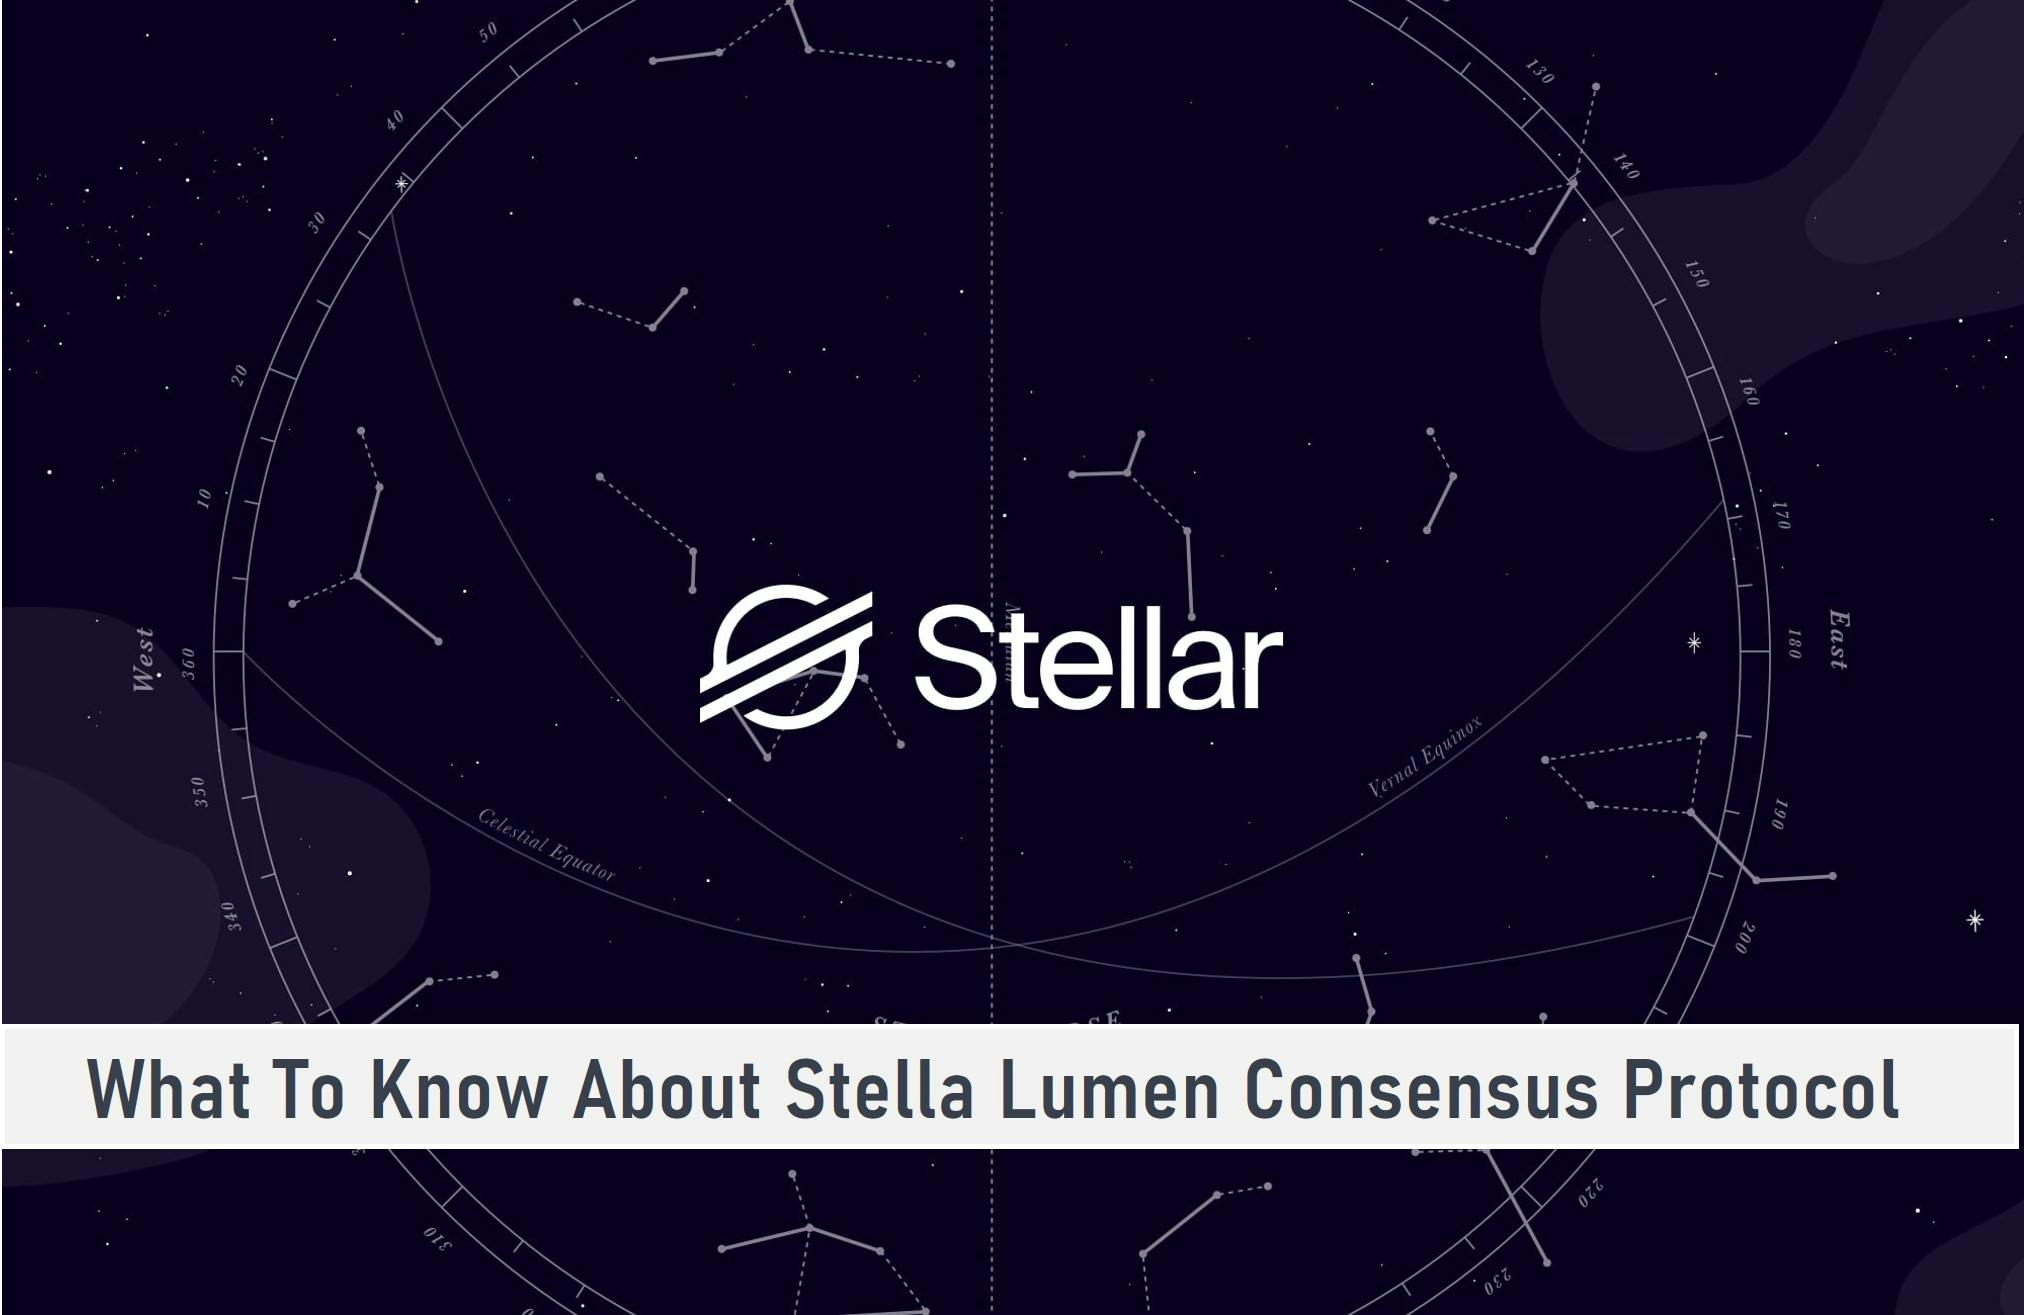 What To Know About Stella Lumen Consensus Protocol